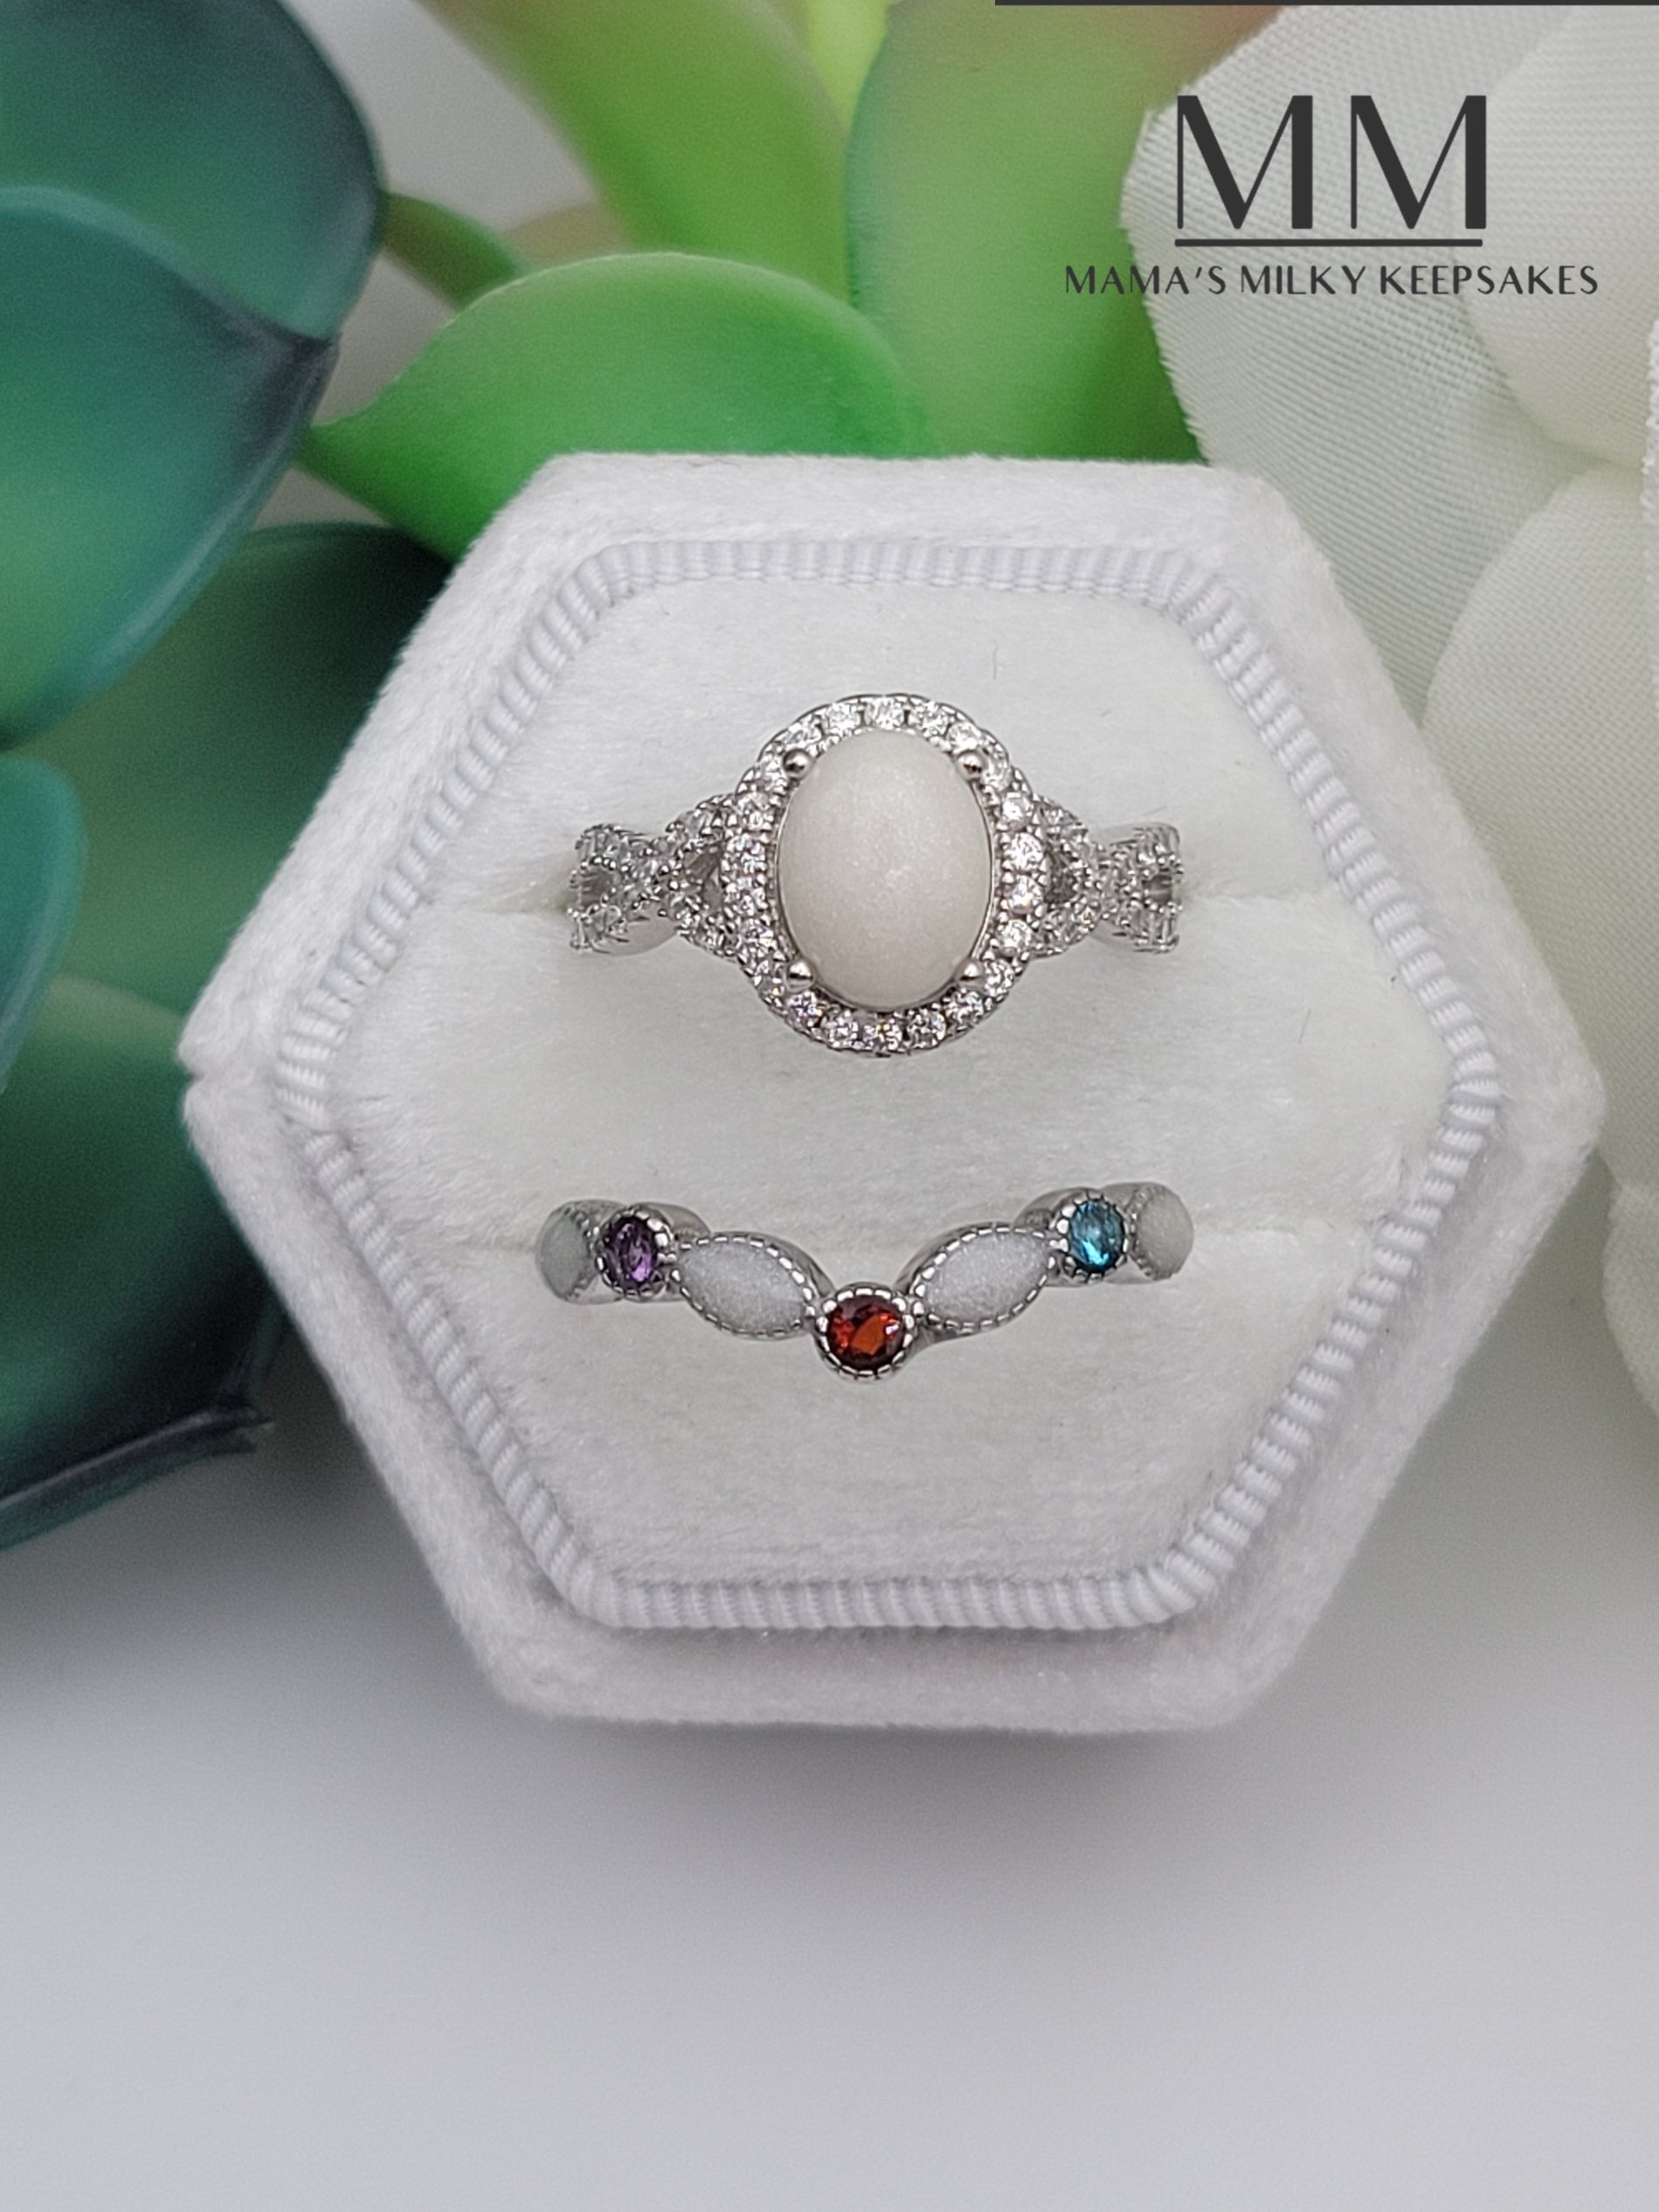 Breastmilk Oval Ring Set, Cremation Oval Ring Set, Keepsake Oval Ring Set, Sterling Silver Oval Ring Set, Hair Oval Ring Set, Ash Oval Ring Set, Umbilical Cord Oval Ring Set, BreastmilkJewelry Oval Ring Set DIY Oval Ring Set